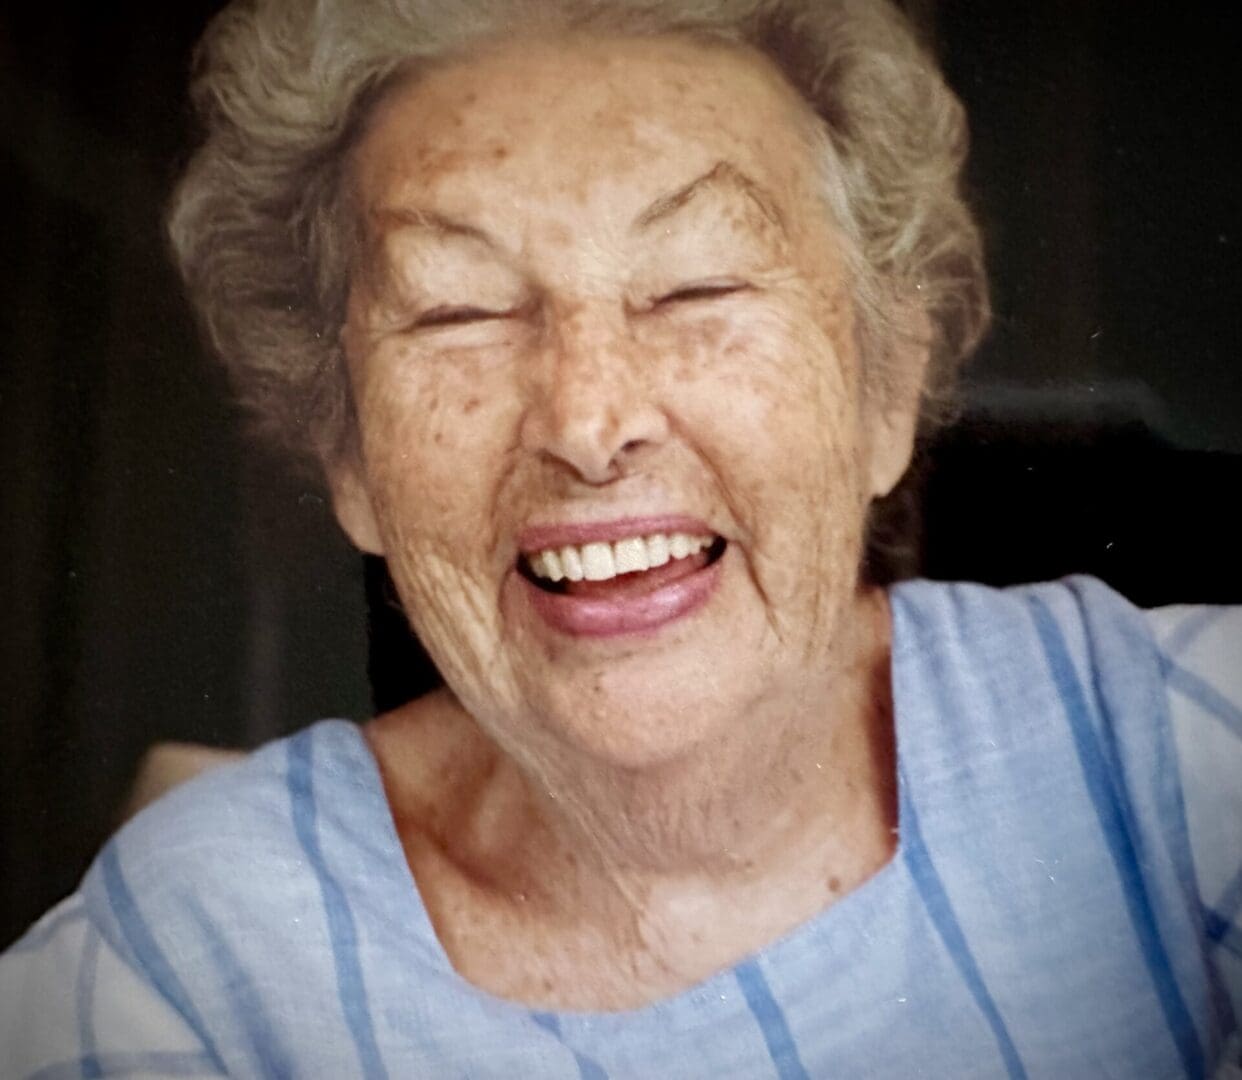 An elderly woman with gray hair, laughing heartily, wearing a blue striped top, viewed through a window.